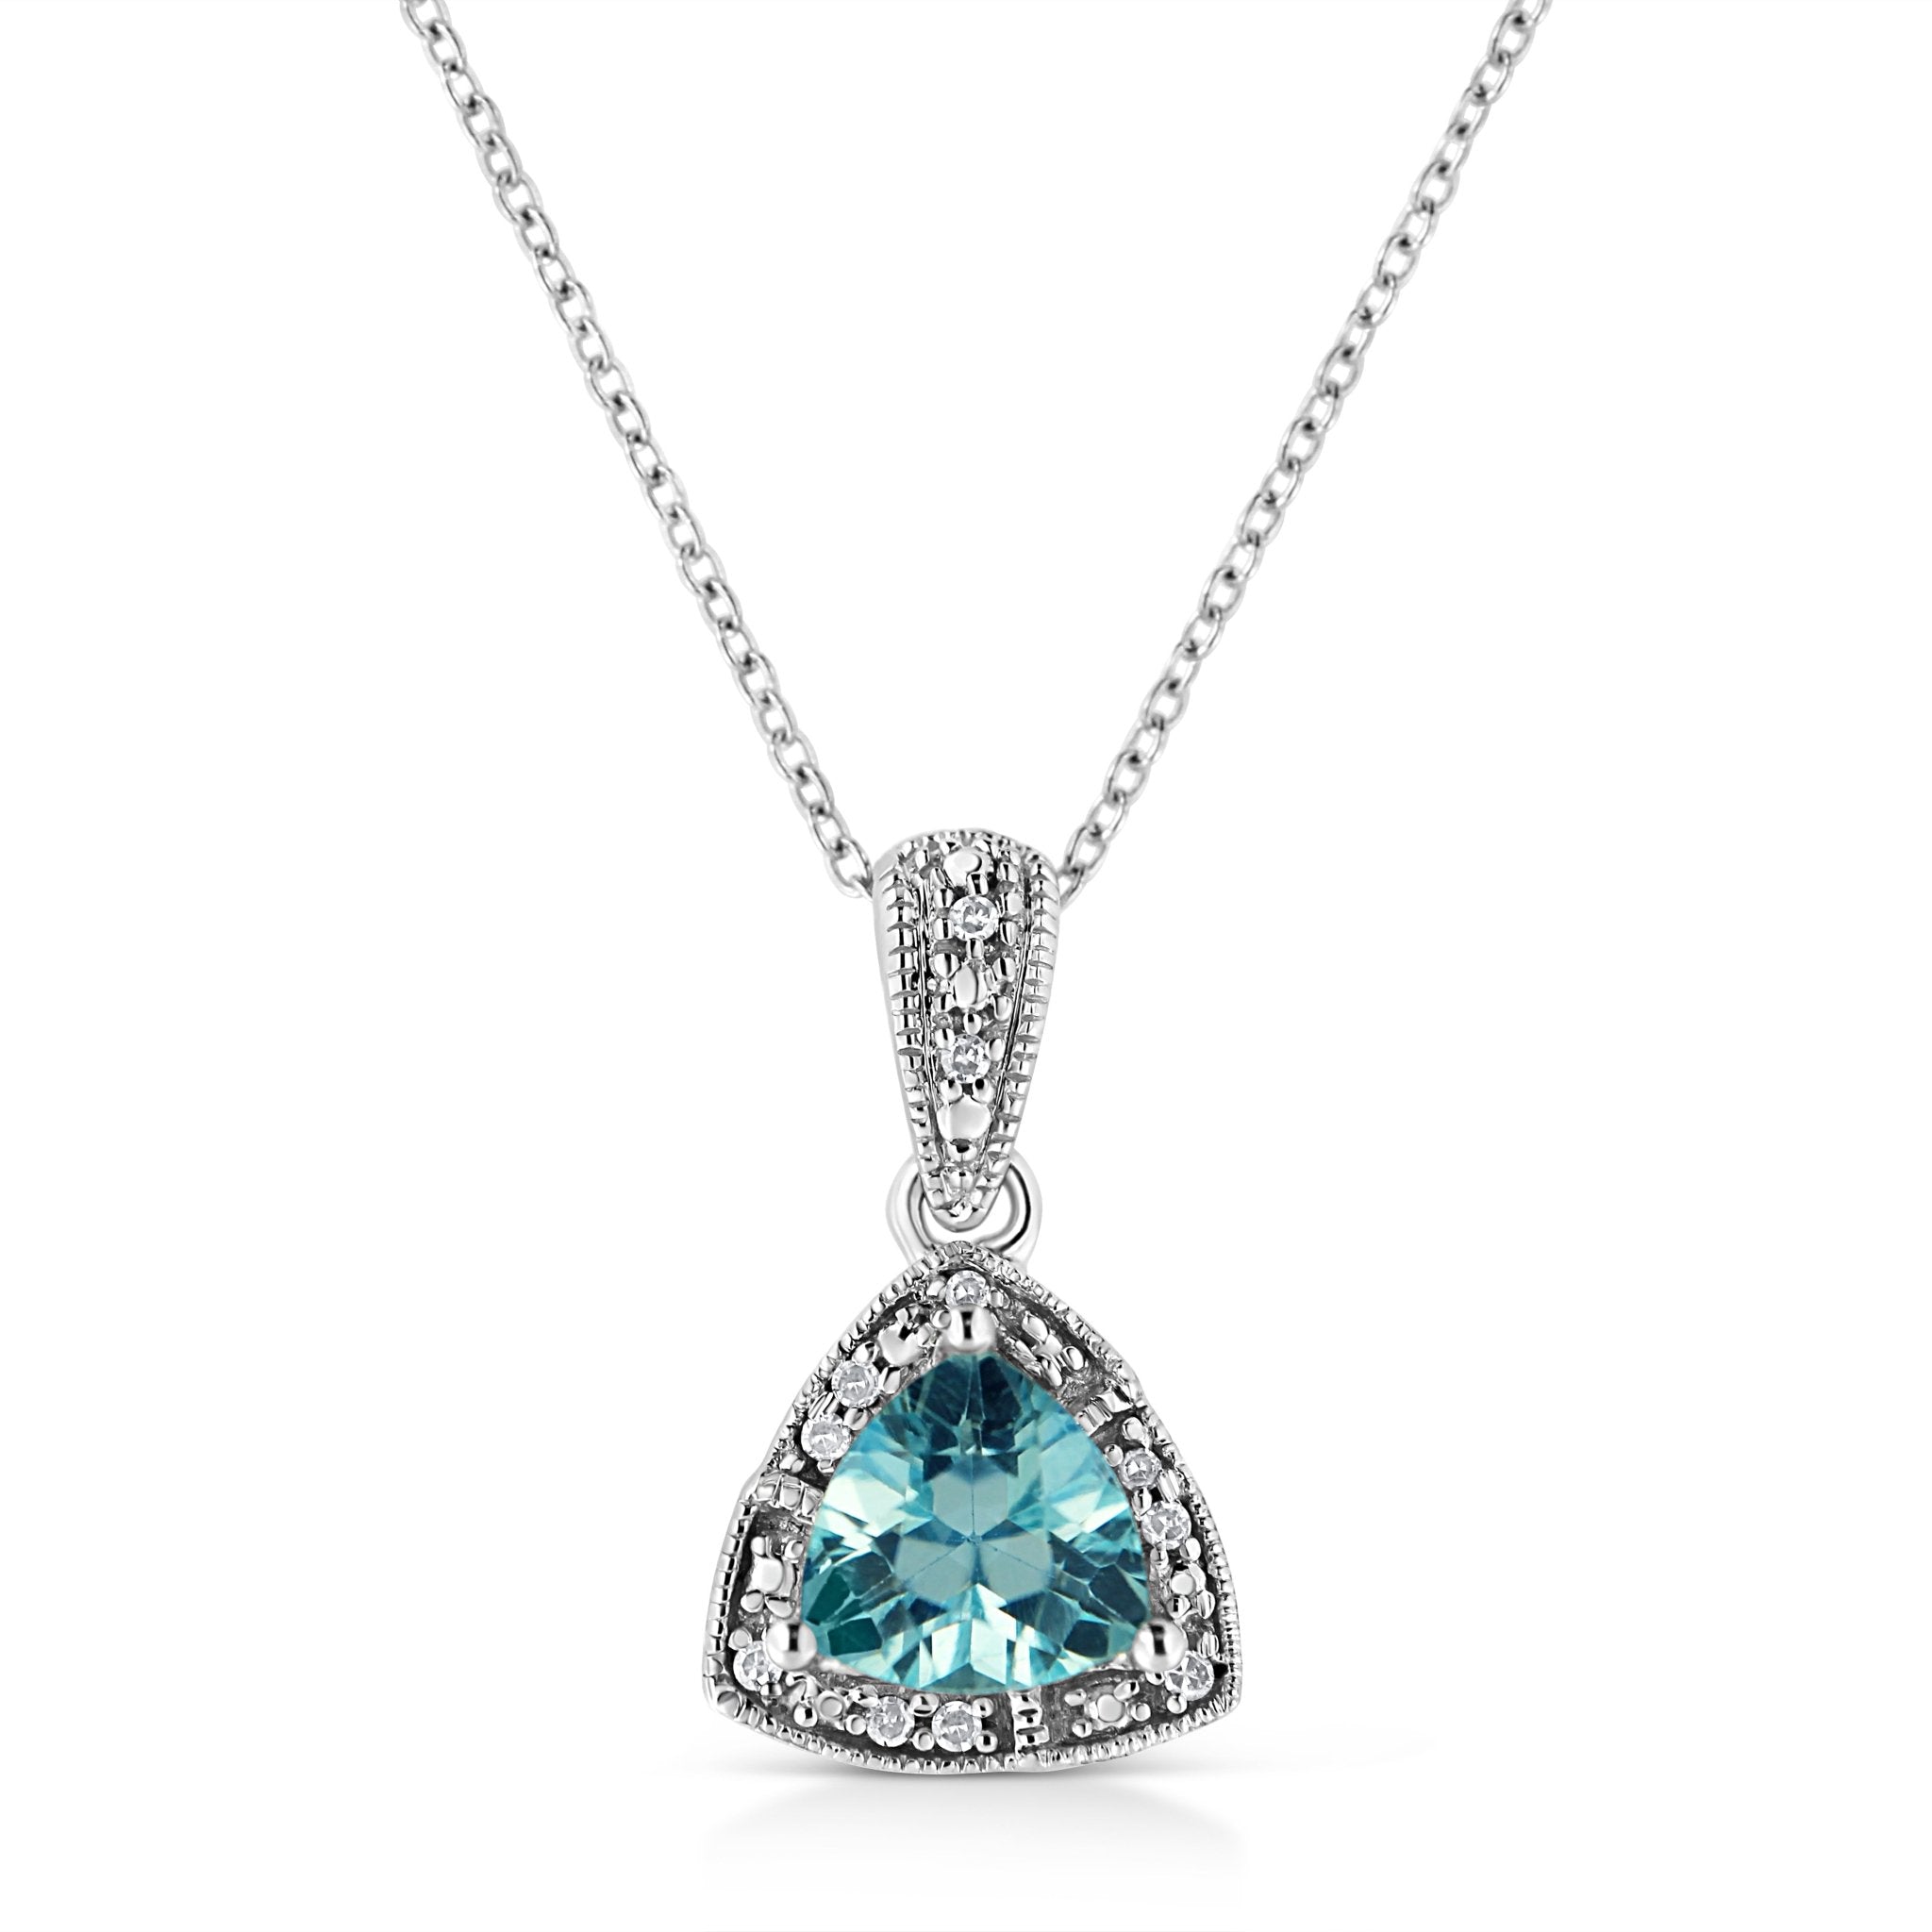 .925 Sterling Silver 7X7 Mm Trillion Cut Blue Topaz Gemstone And Diamond Accent 18" Pendant Necklace (I-J Color, I1-I2 Clarity) - Tuesday Morning-Pendant Necklace